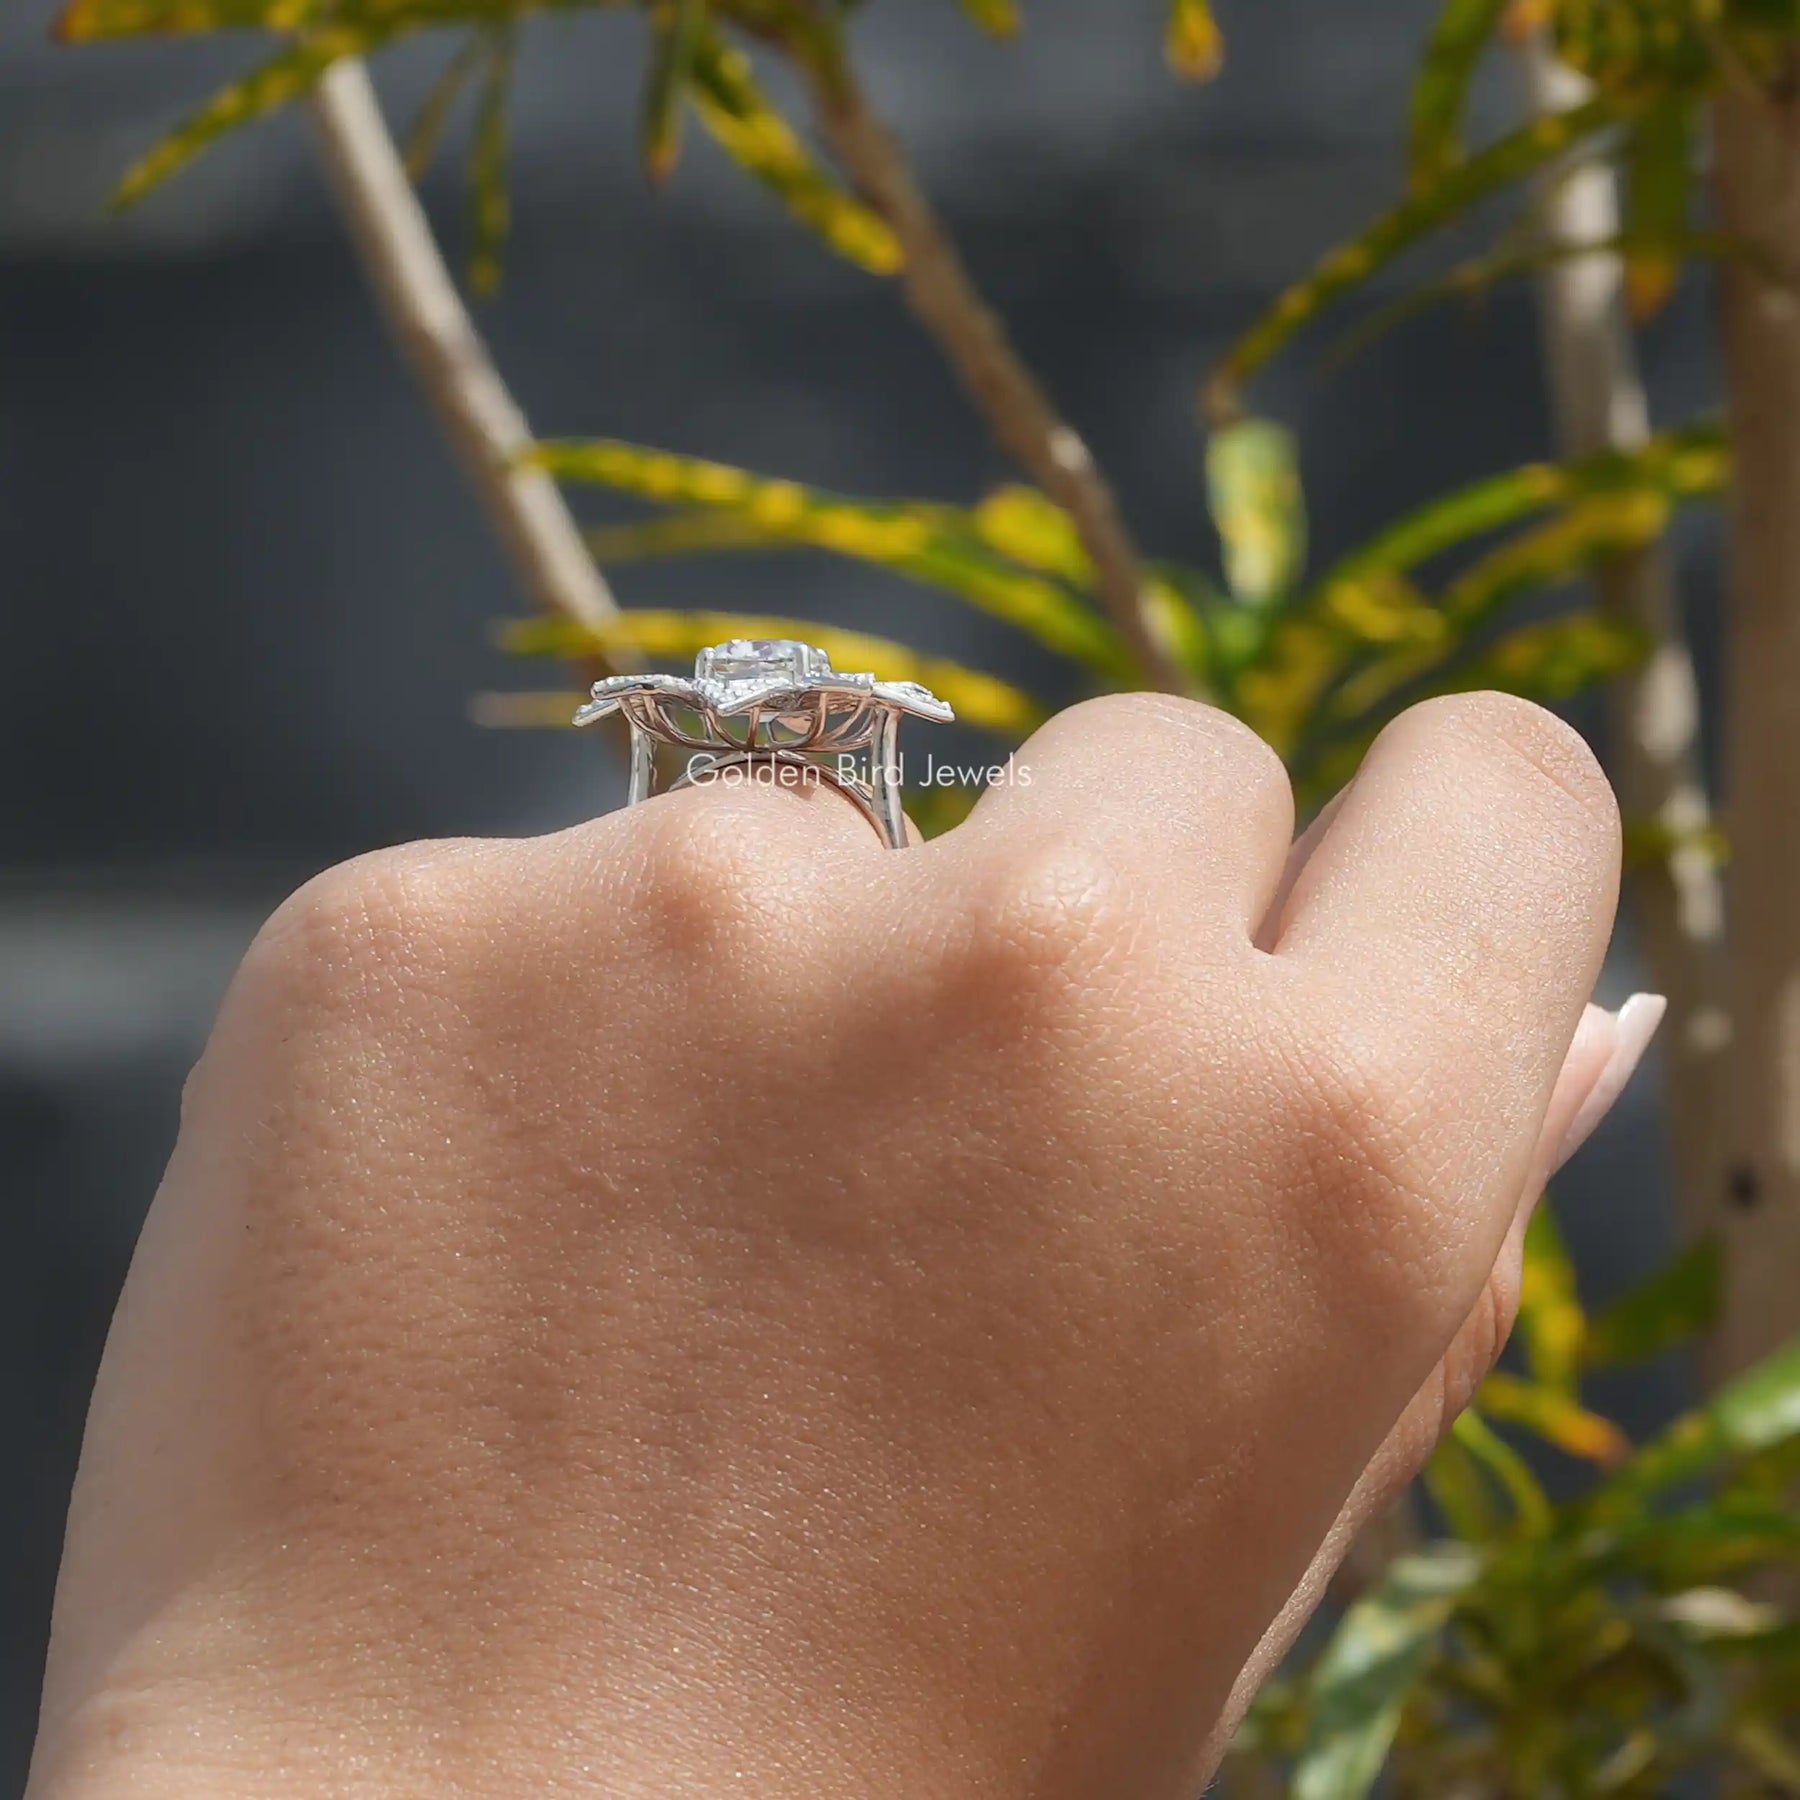 [Floral Round Cut Moissanite Engagement Ring In White Gold]-[Golden Bird Jewels]